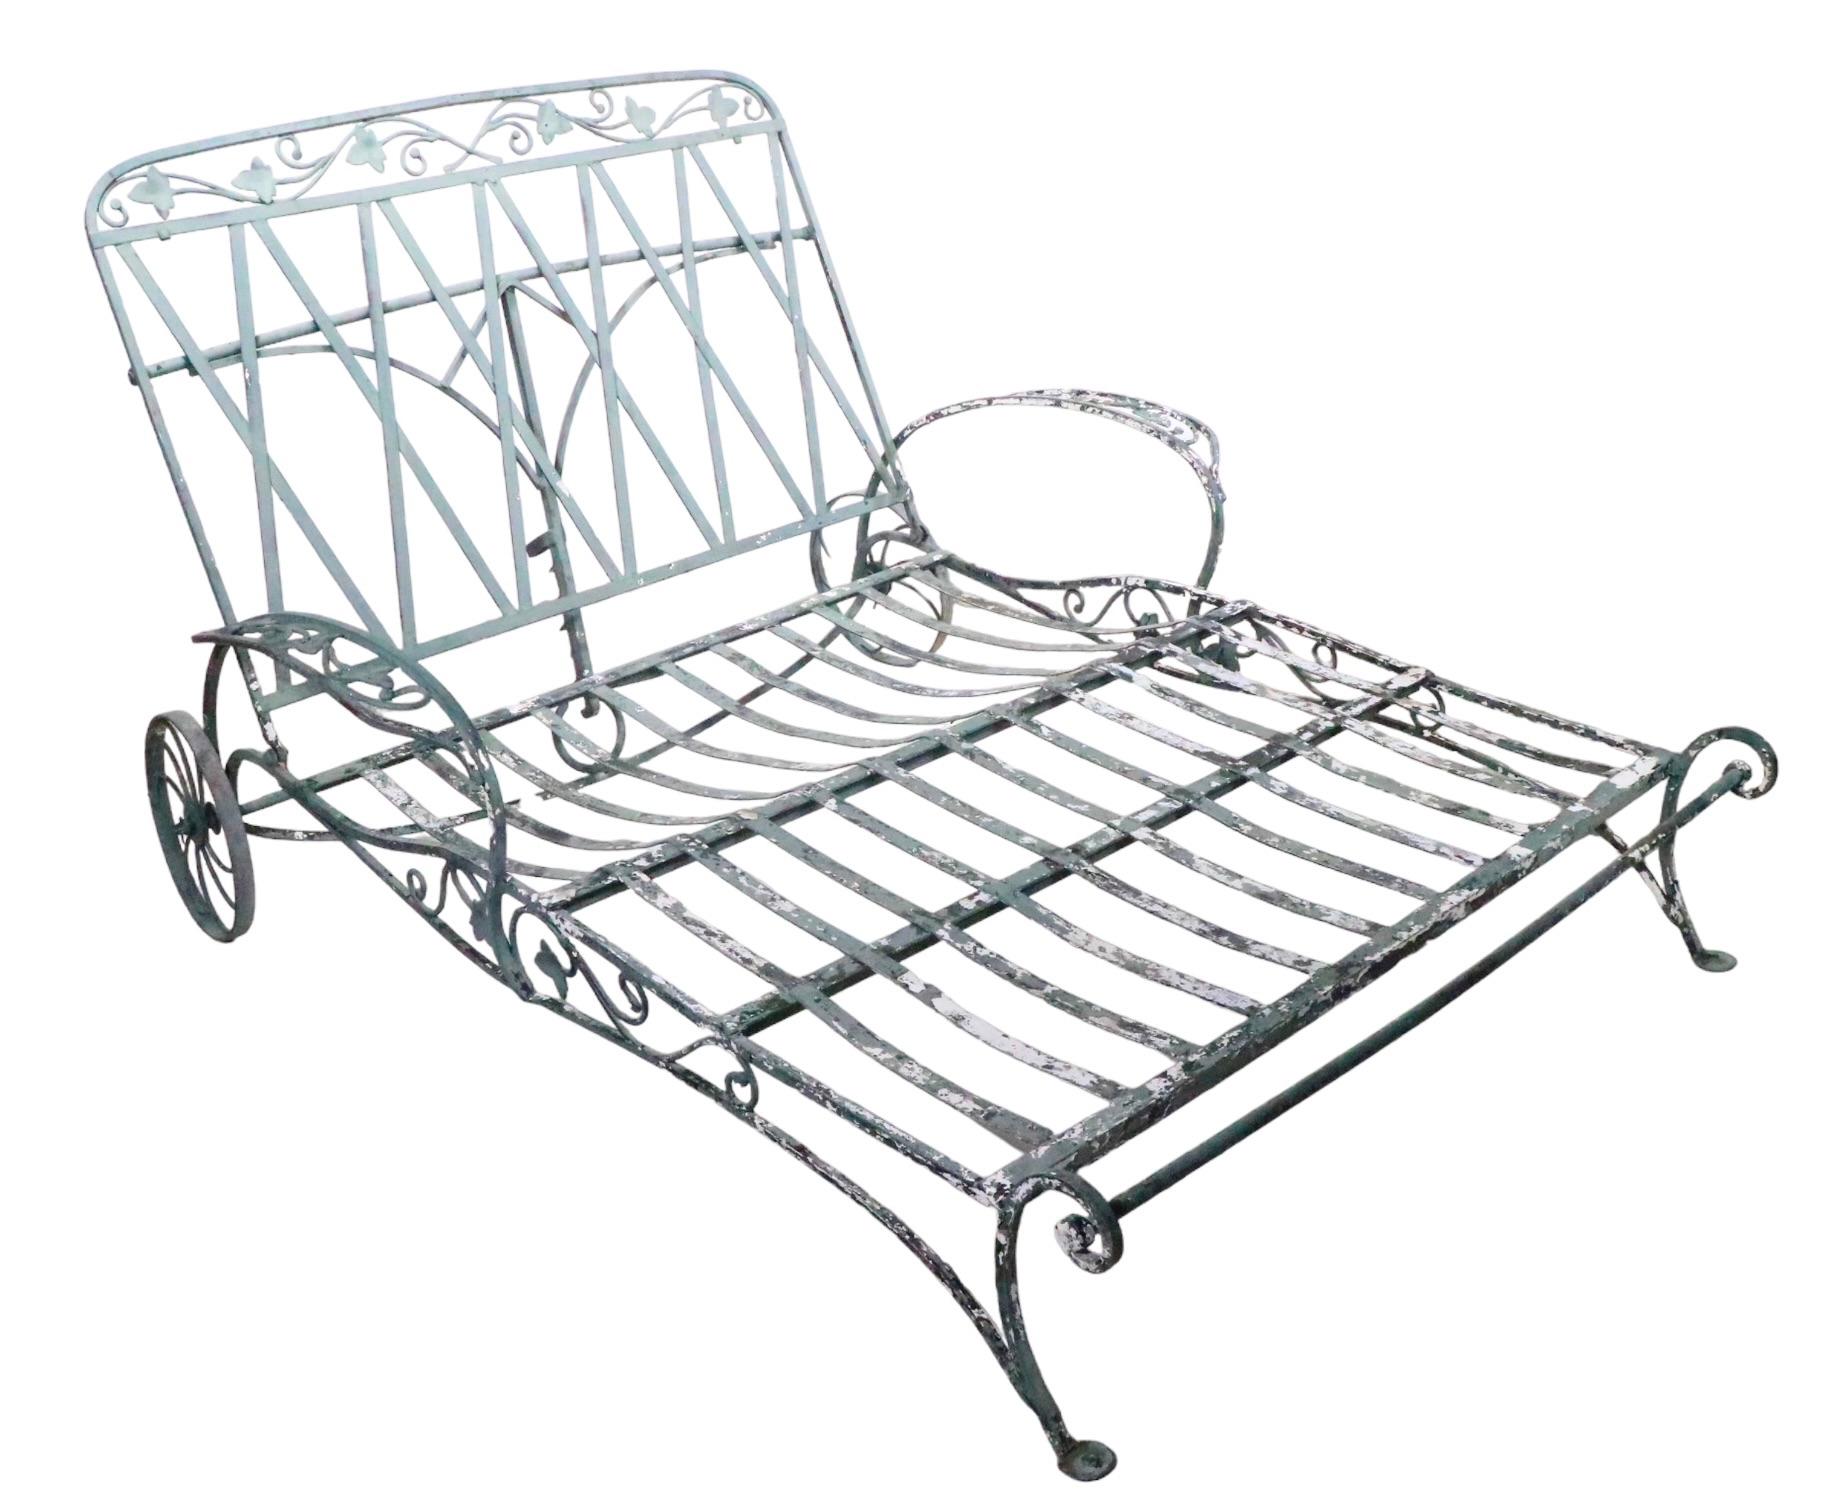  Wrought Iron Garden Patio  Double Wide Reclining Chaise Lounge by Salterini  7